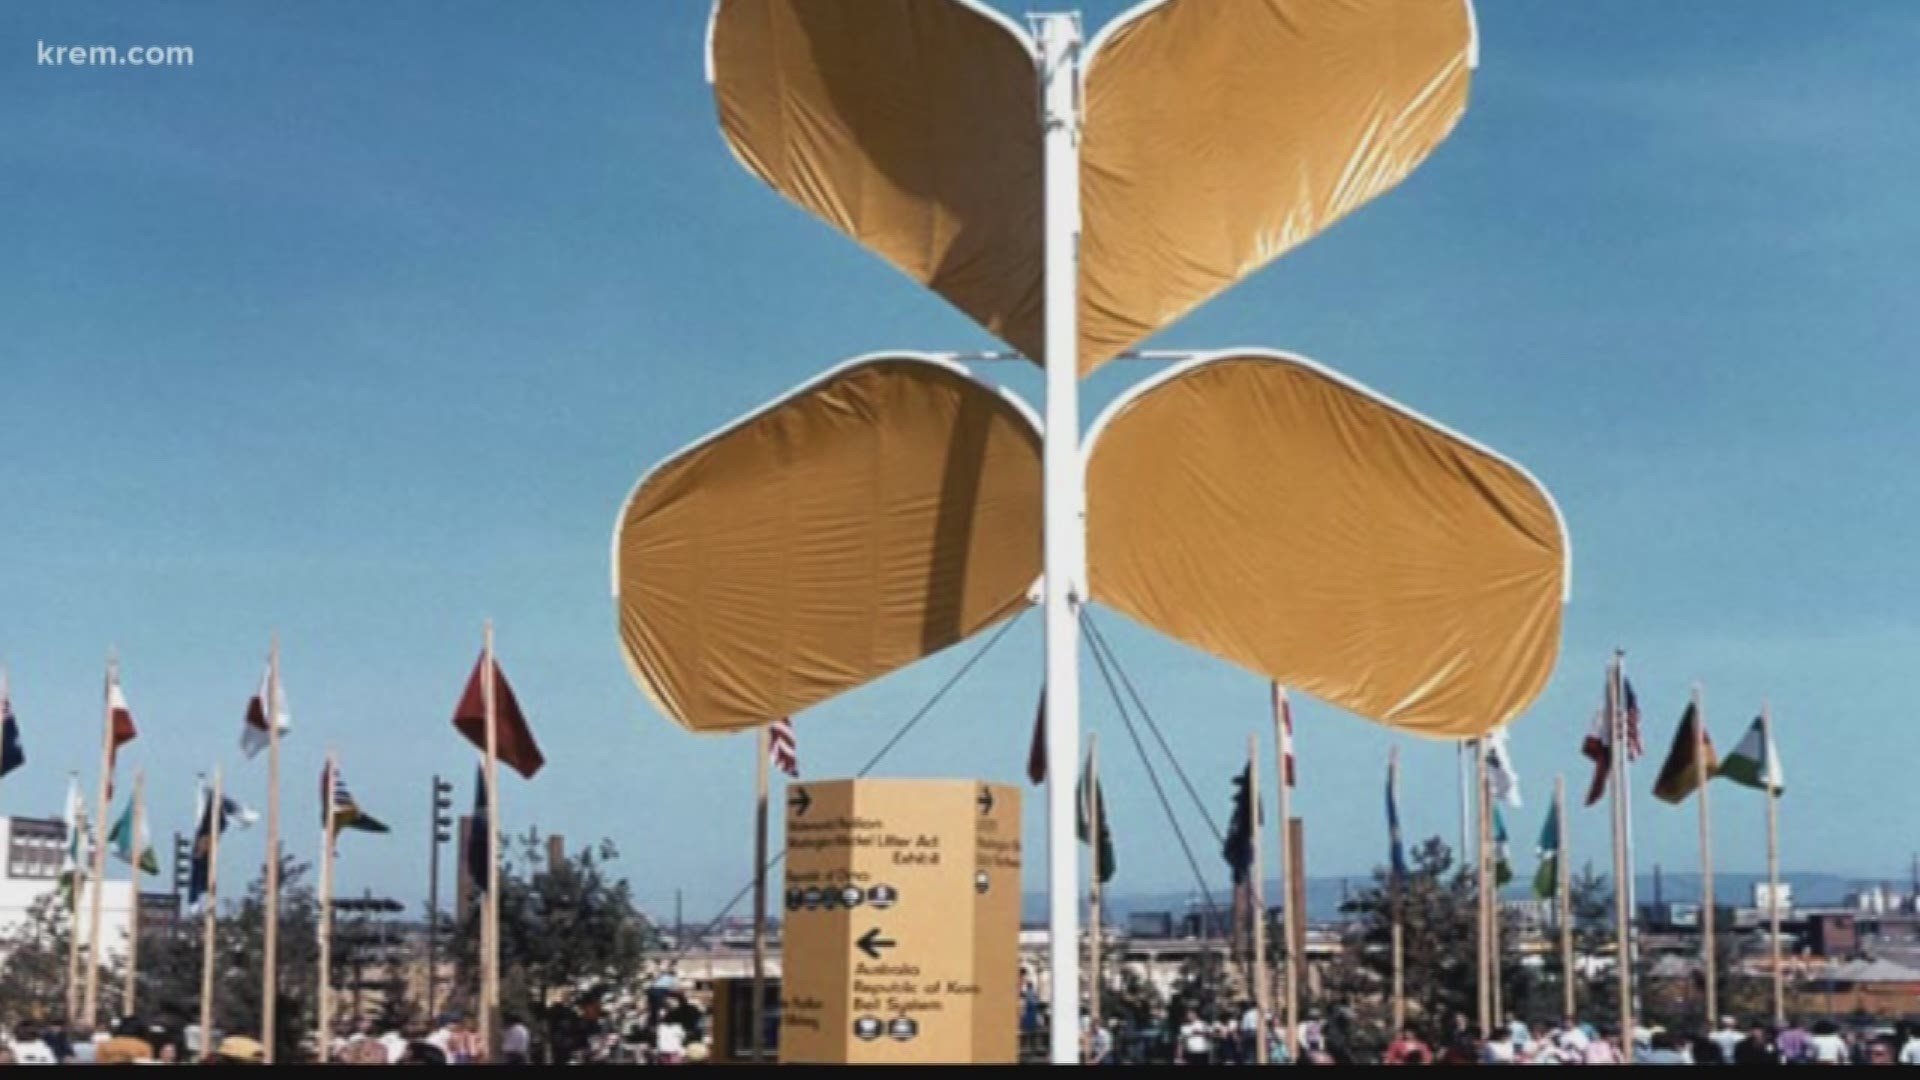 The North Promenade is a revamped gateway to the park featuring a route for both pedestrians and bicyclists. It will feature one of the iconic Expo '74 butterflies.